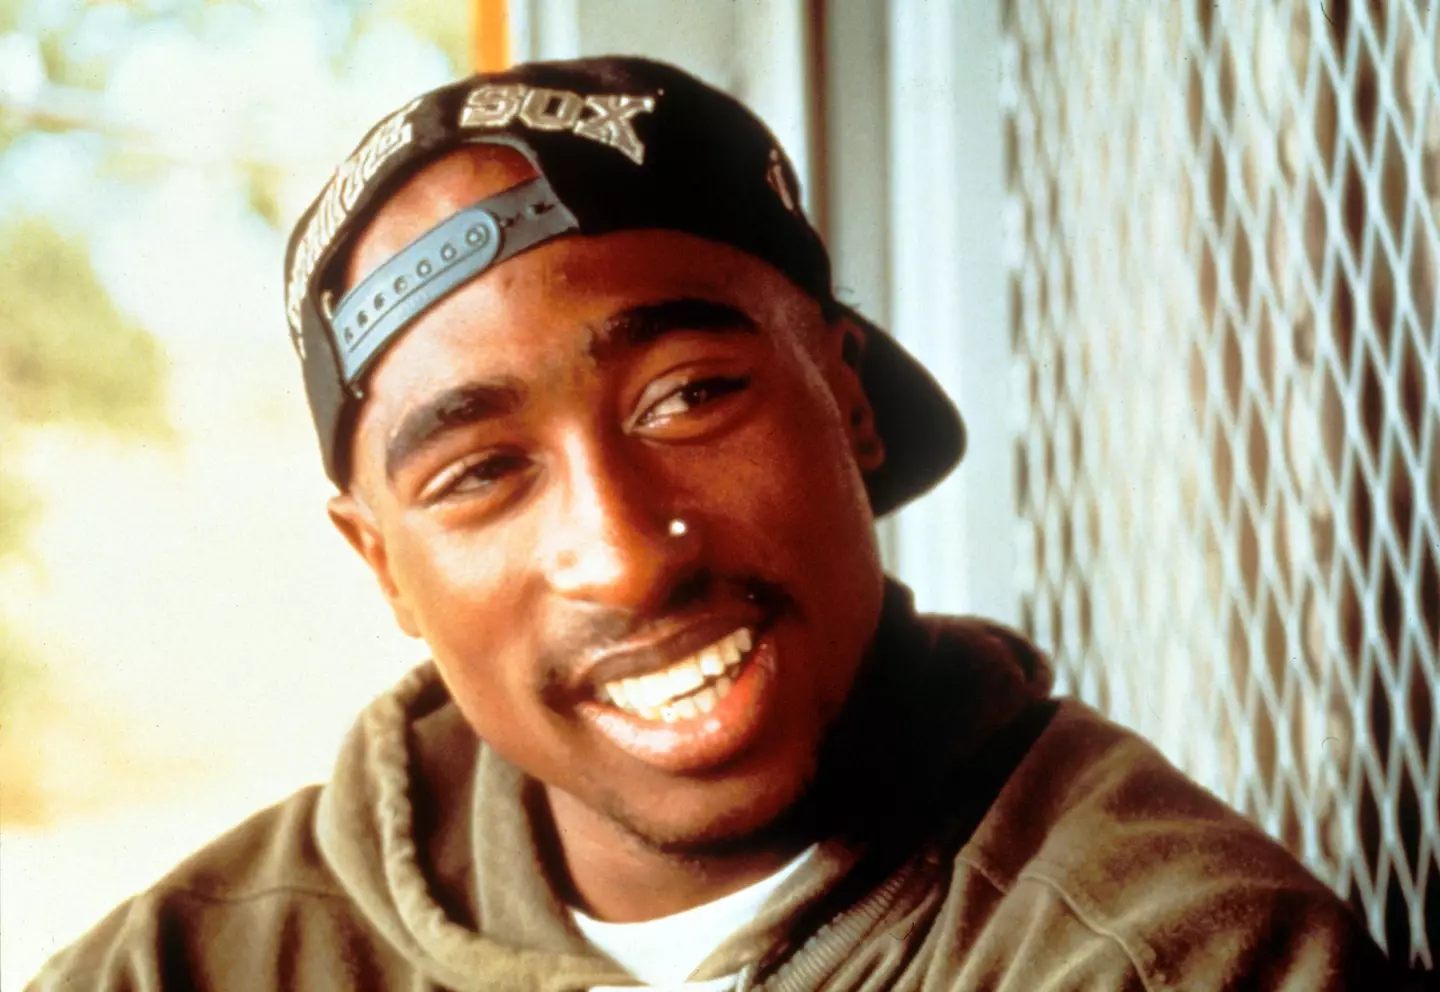 Tupac died in 1996 after a driveby shooting.